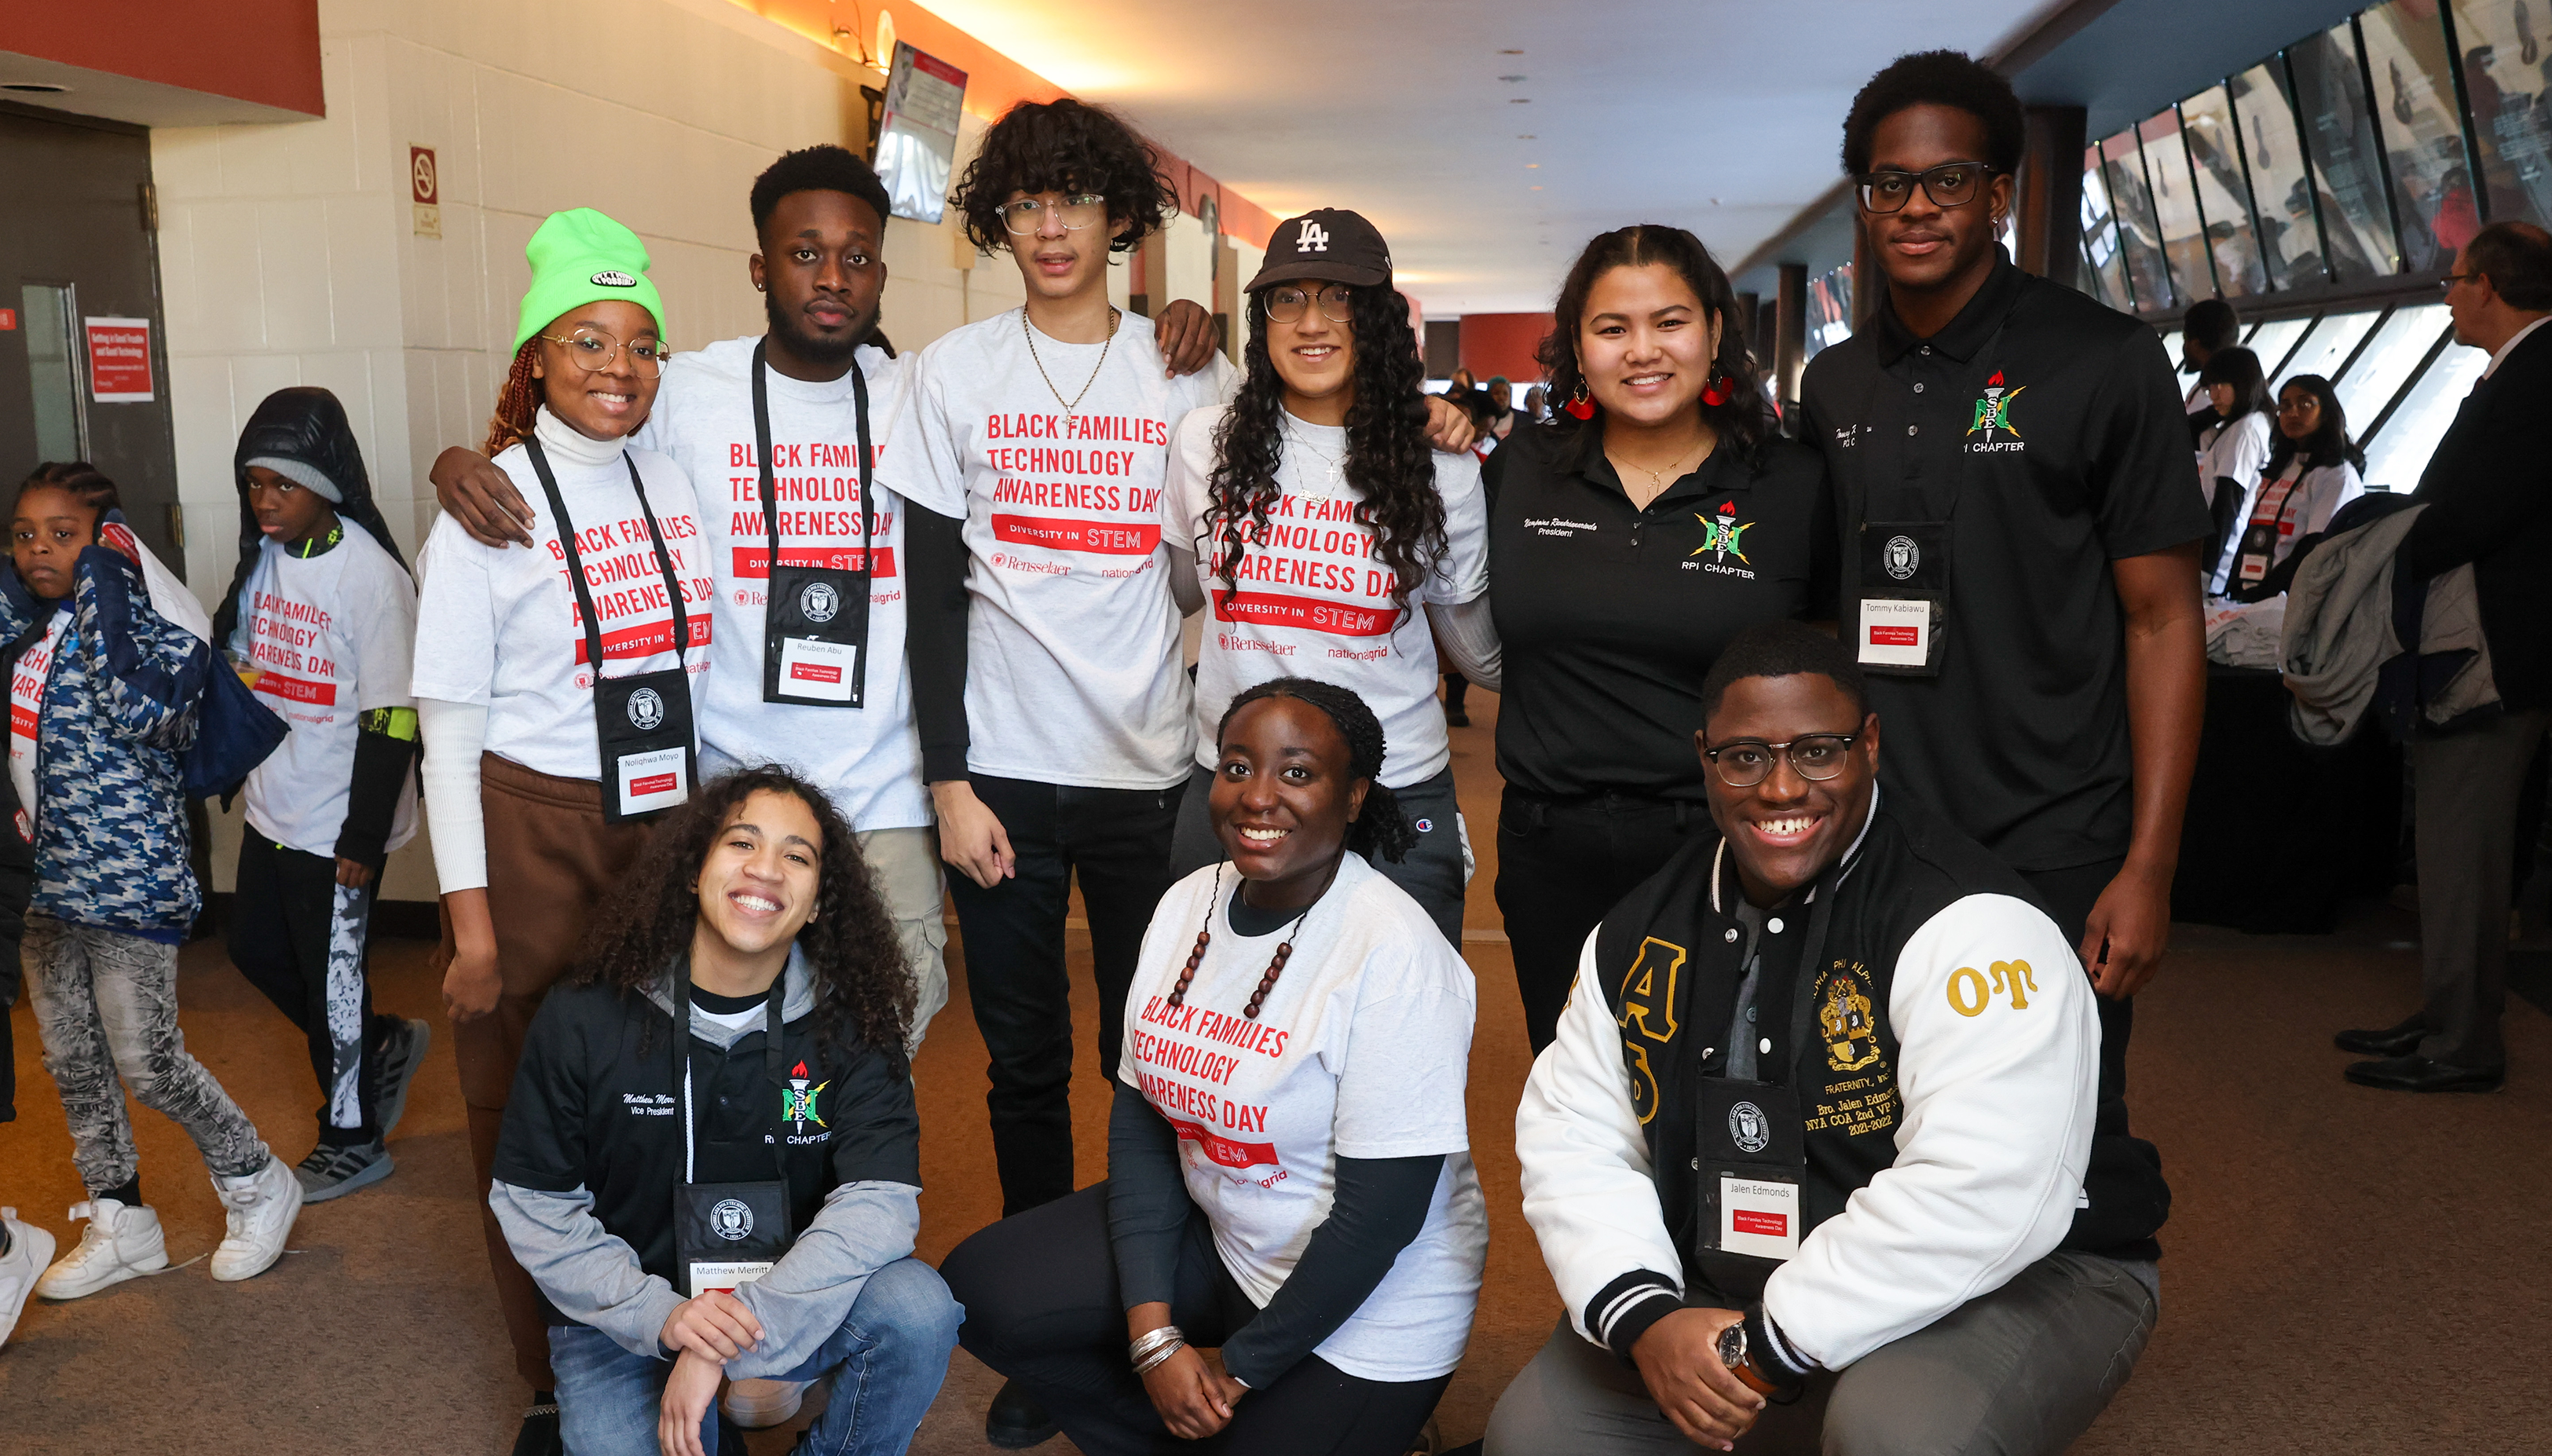 RPI student leaders at Black Families Technology Awareness Day 2023.